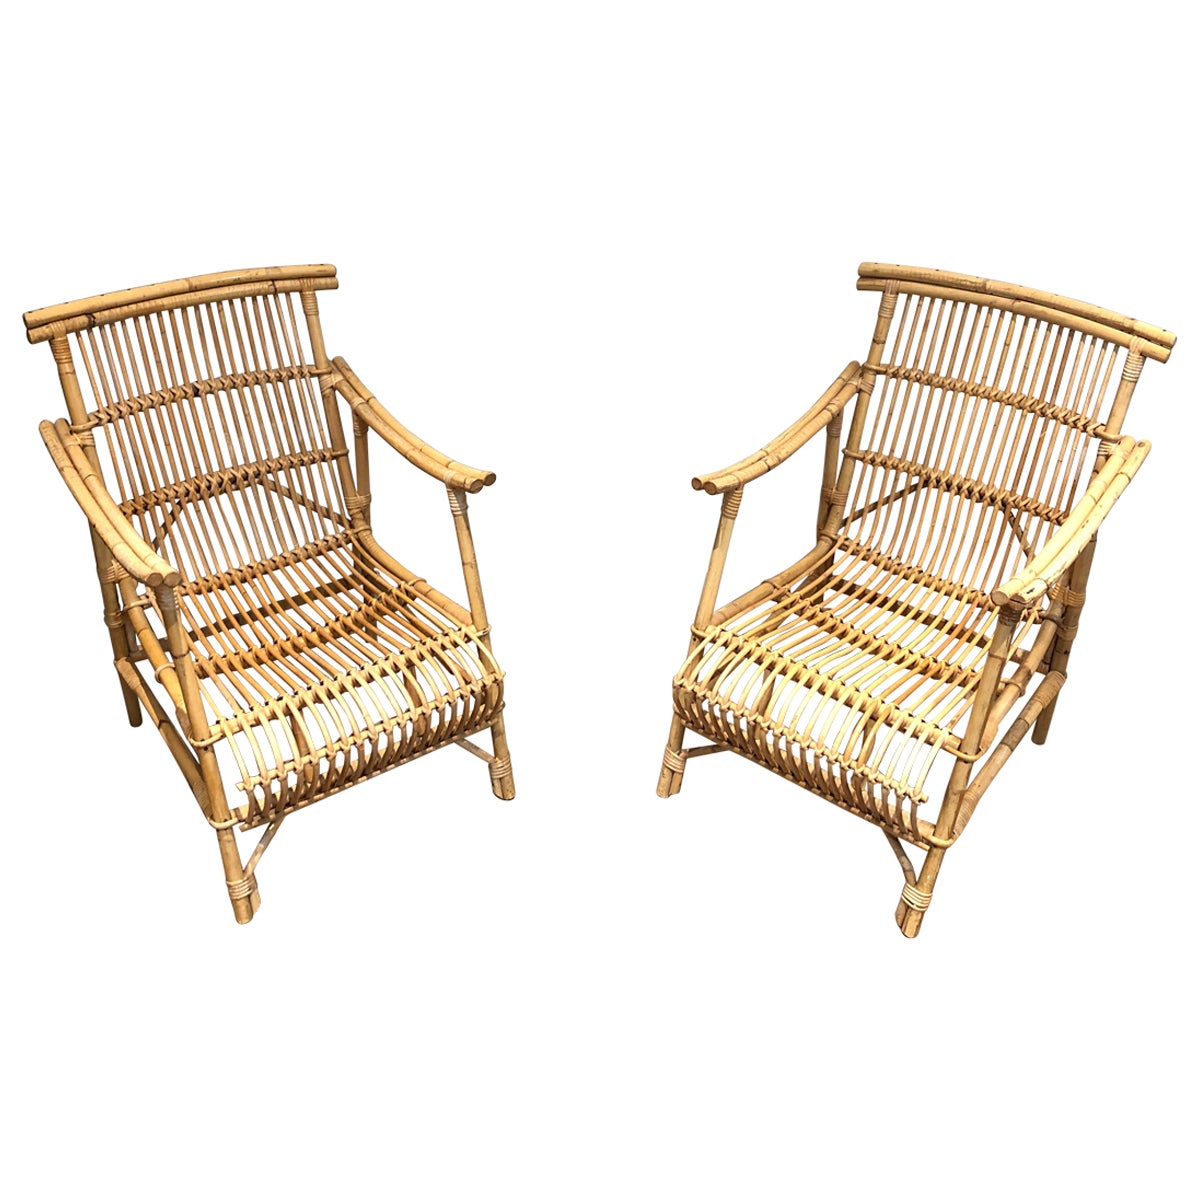 Pair of Rattan Armchairs. French Work, circa 1950 For Sale